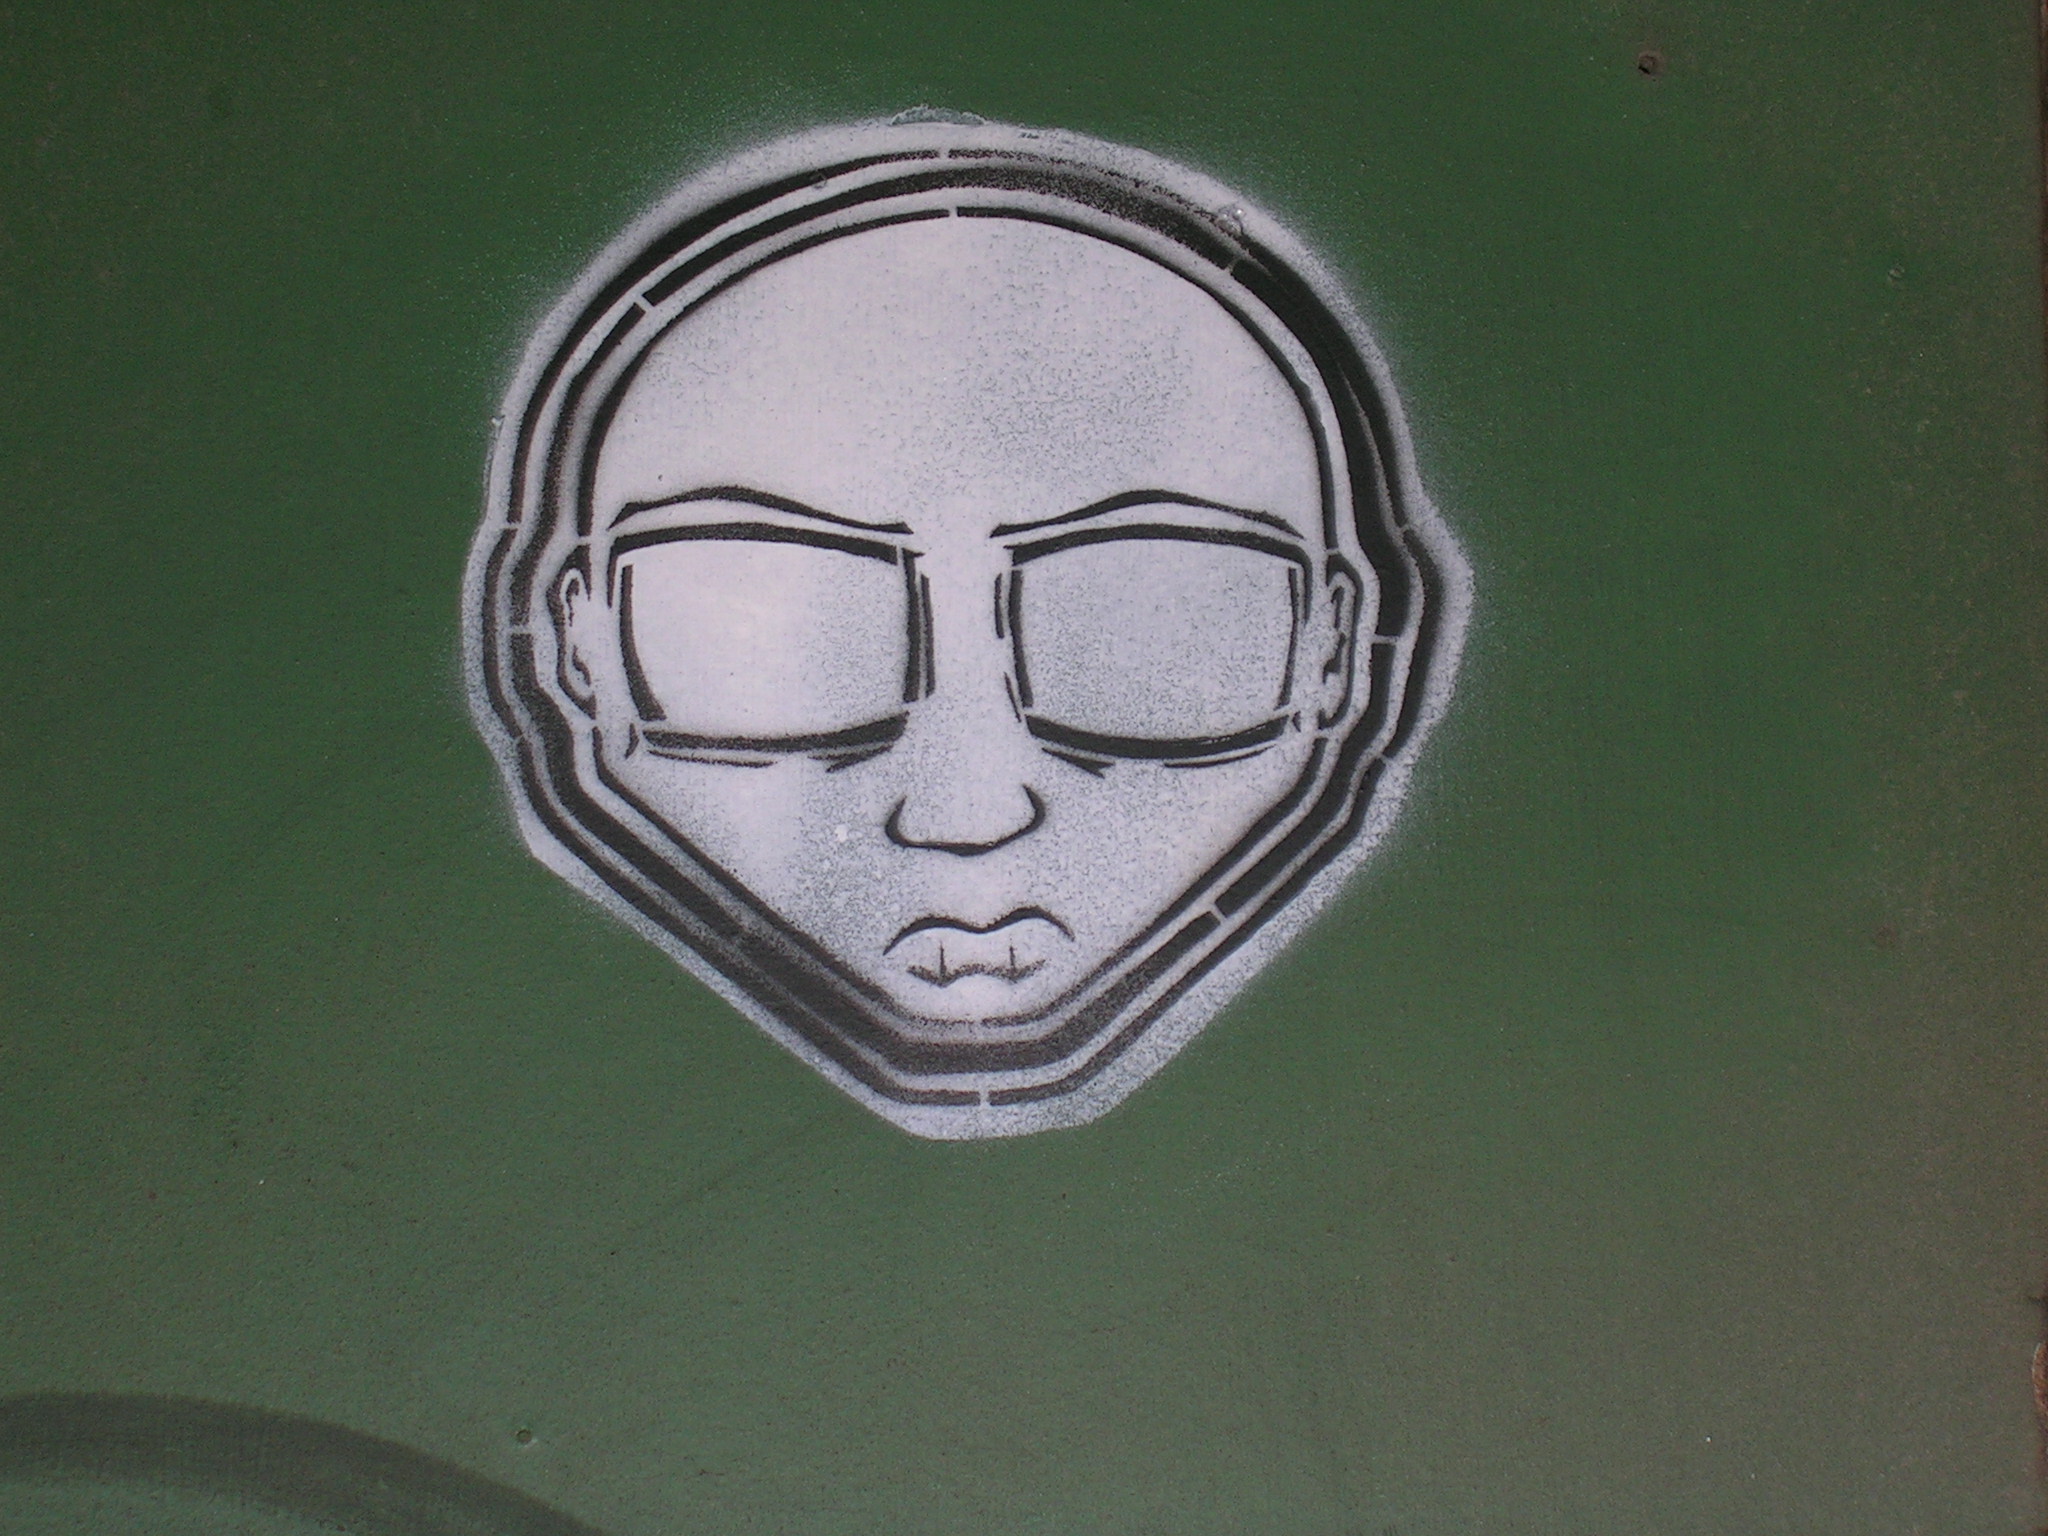 a grafitti painting of a man with glasses